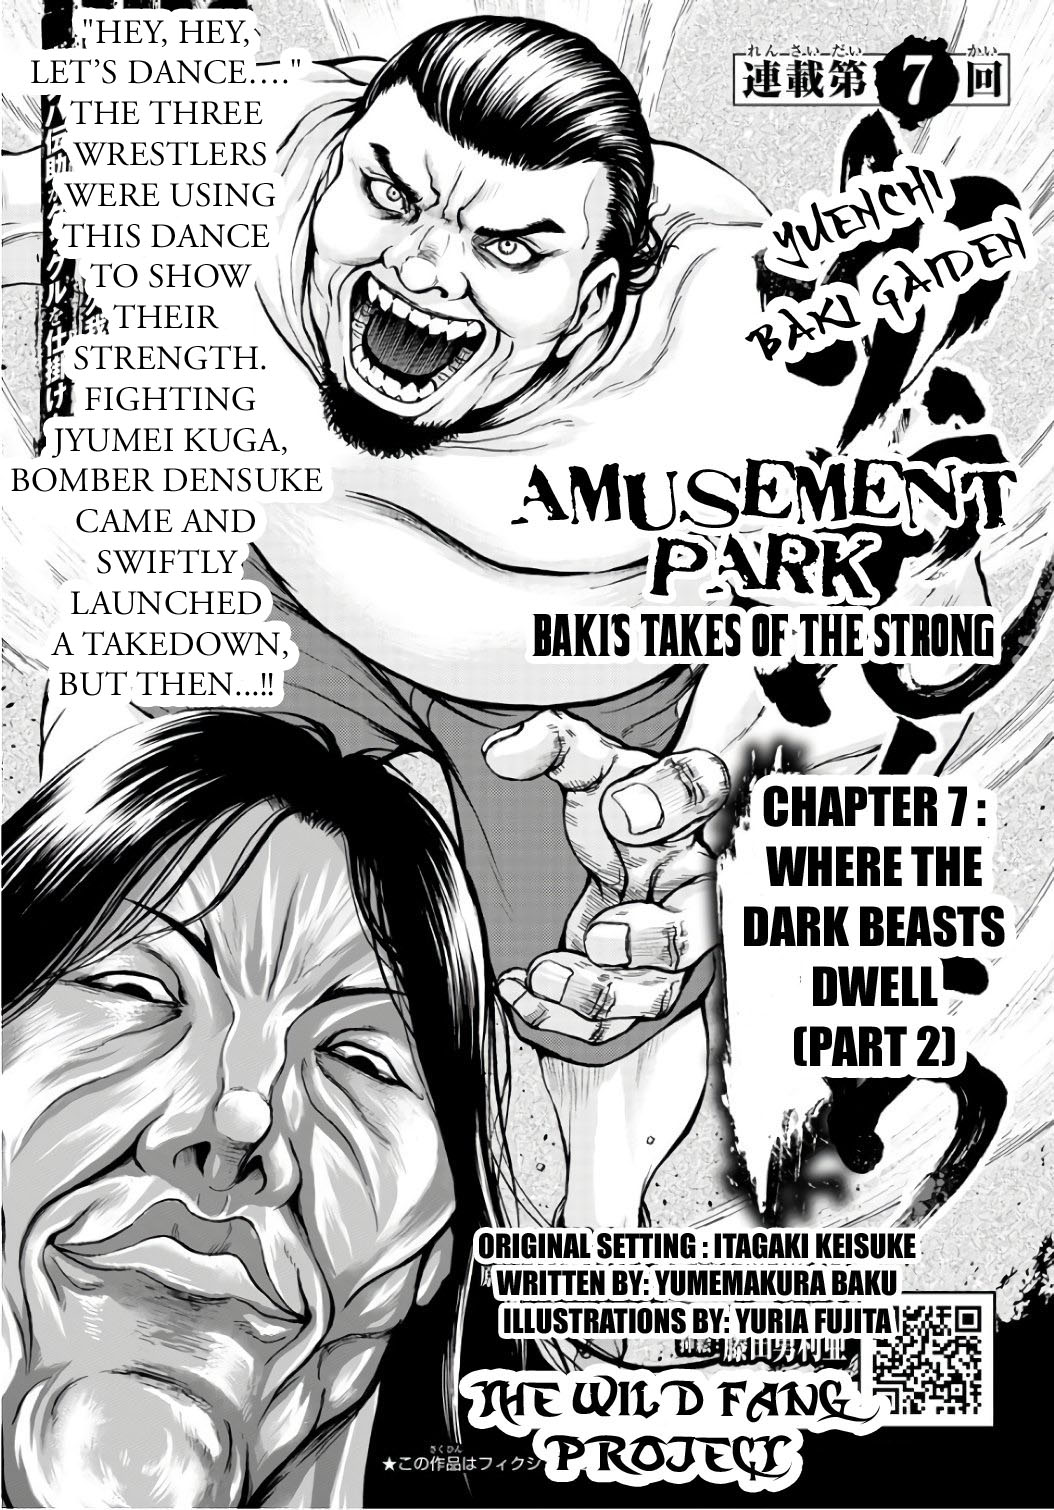 Amusement Park: Baki's Tales Of The Strong Chapter 7 #1